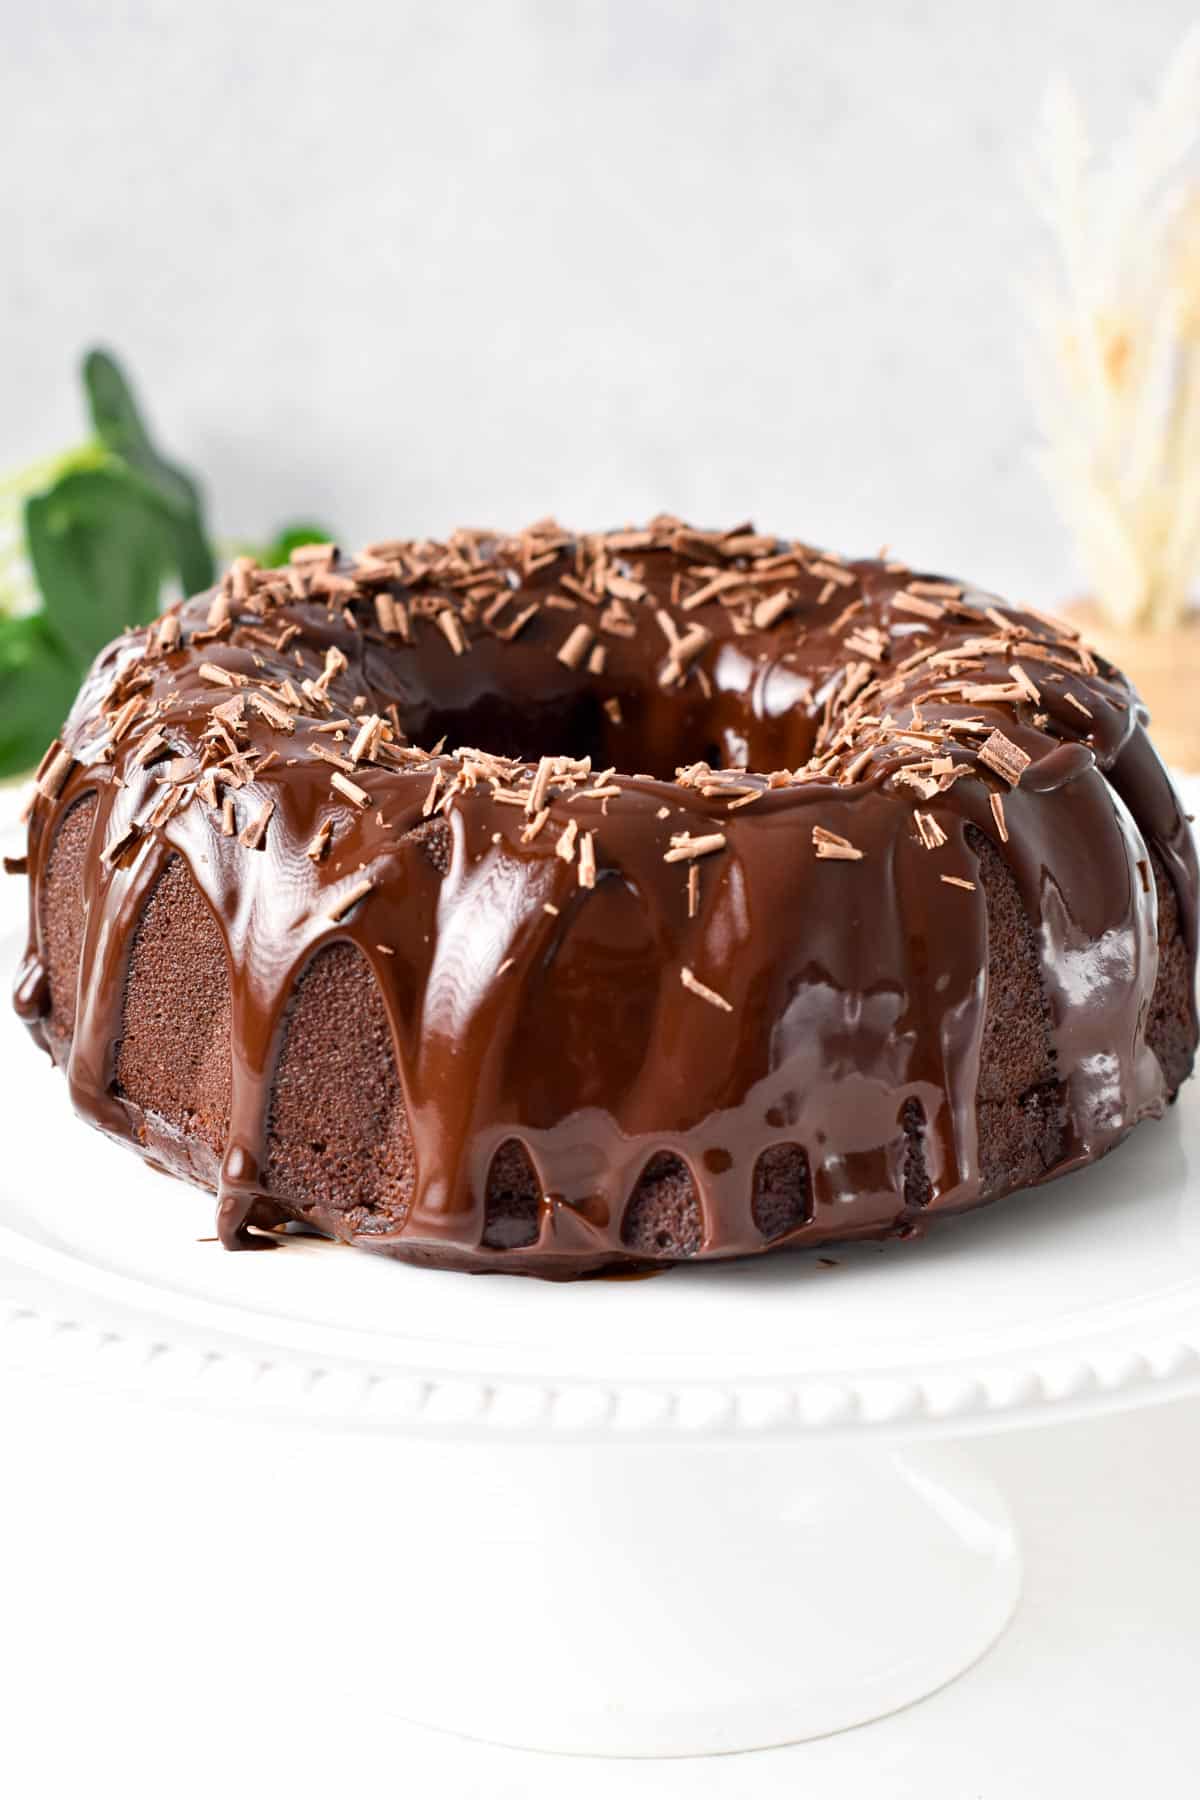 A chocolate Bundt Cake on a cake stand with drippy chocolate ganache and grated chocolate.